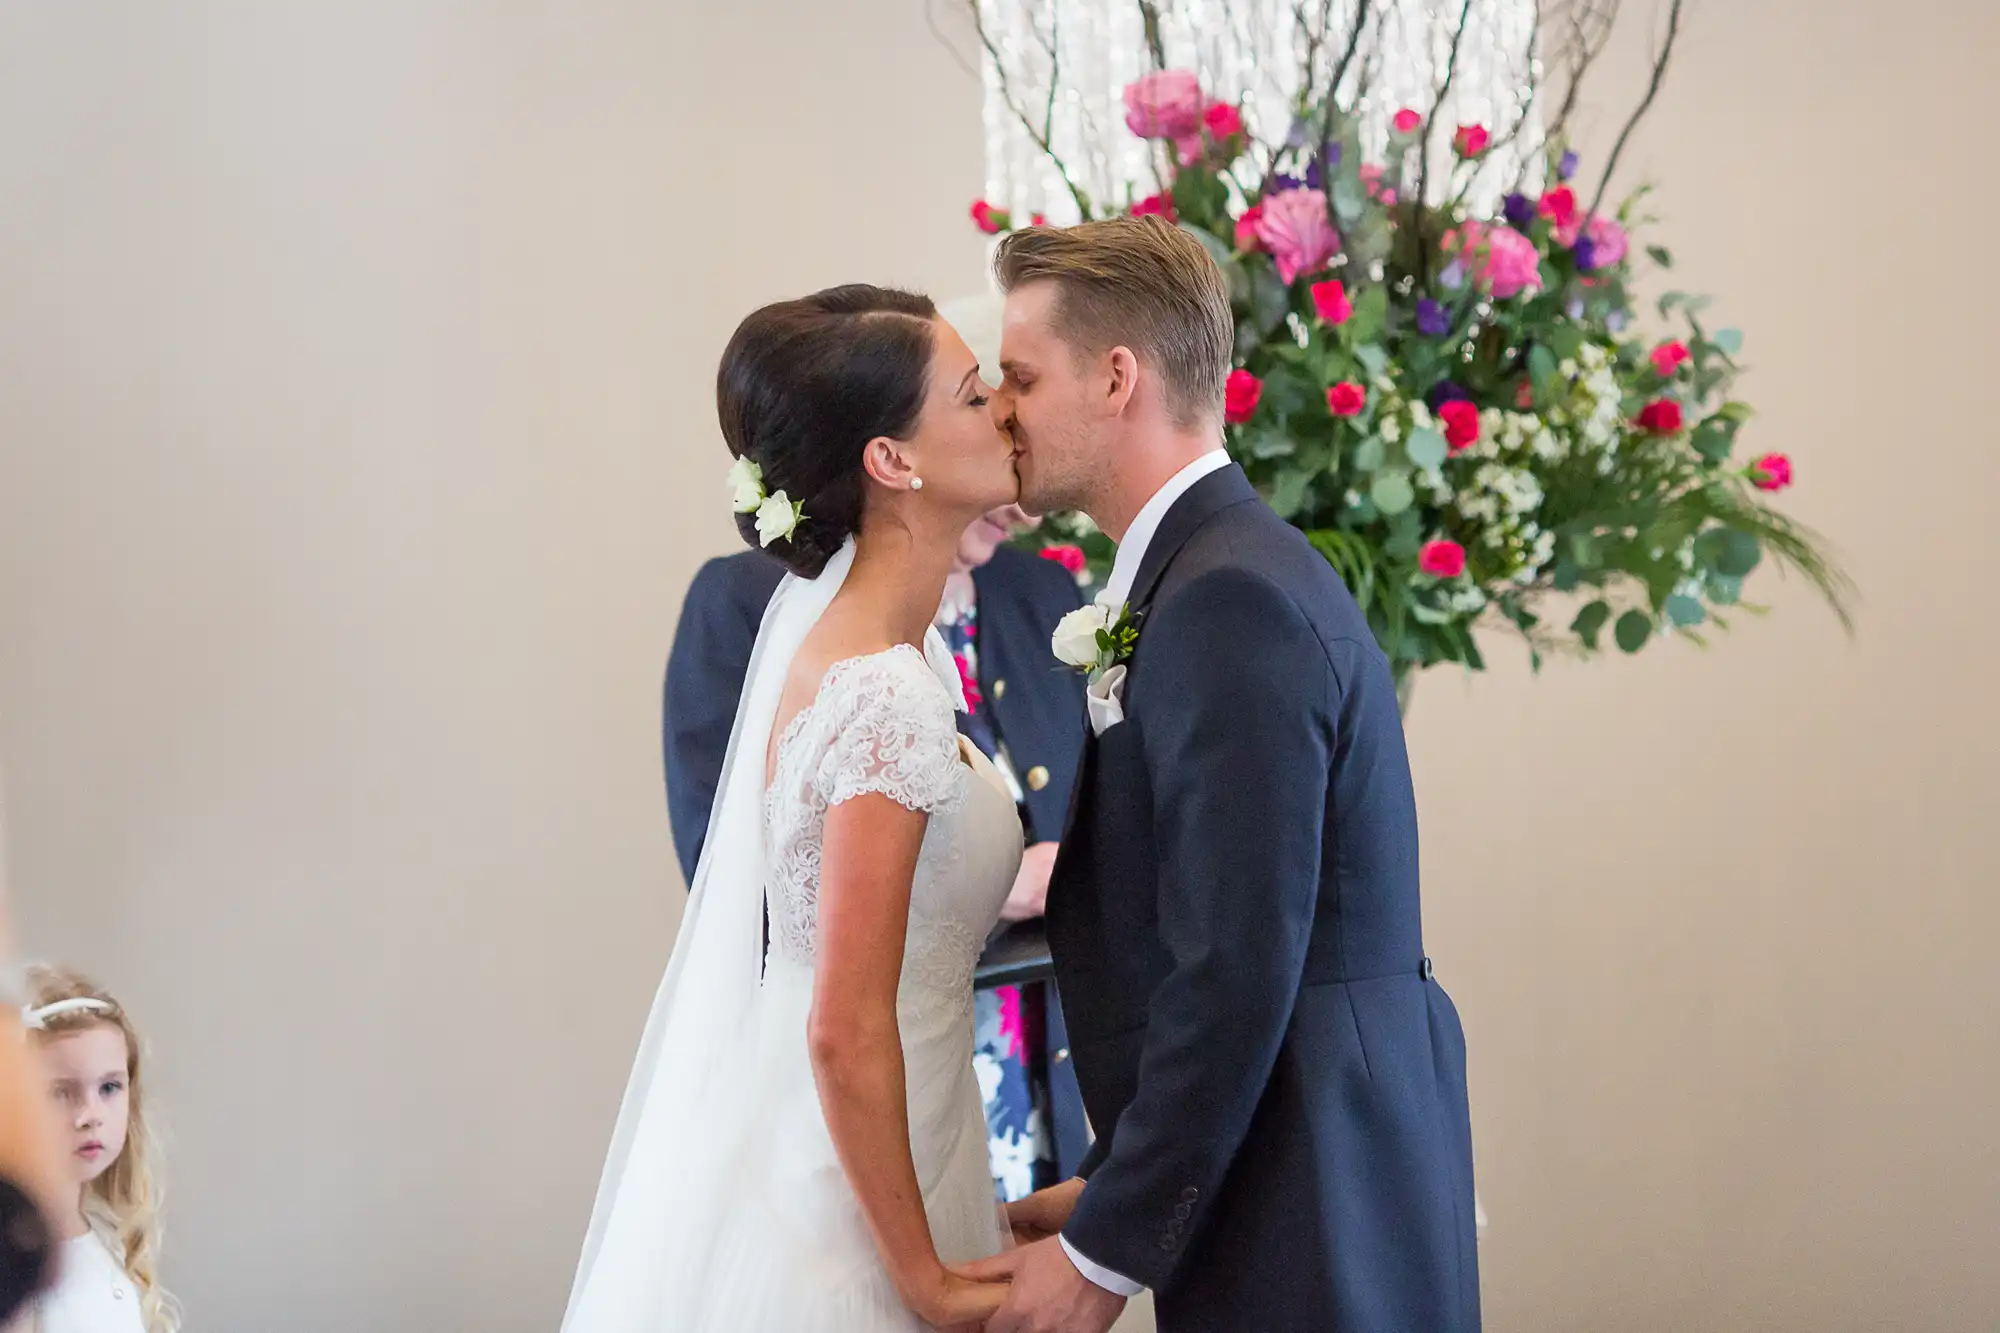 A bride and groom kissing at the altar, with vibrant flowers in the background and a young bridesmaid watching.